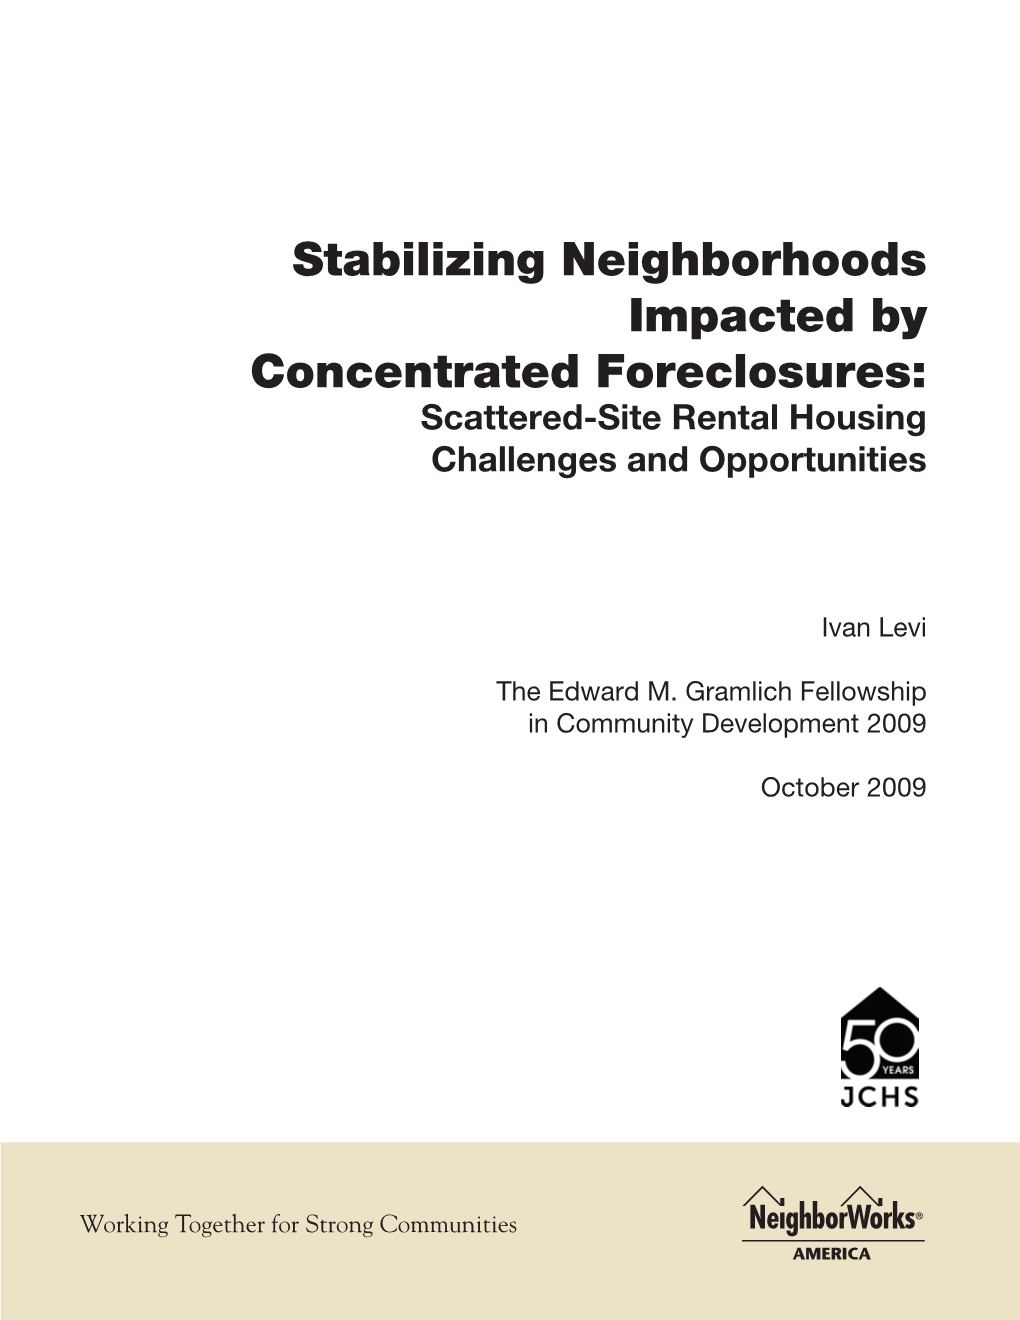 Stabilizing Neighborhoods Impacted by Concentrated Foreclosures: Scattered-Site Rental Housing Challenges and Opportunities